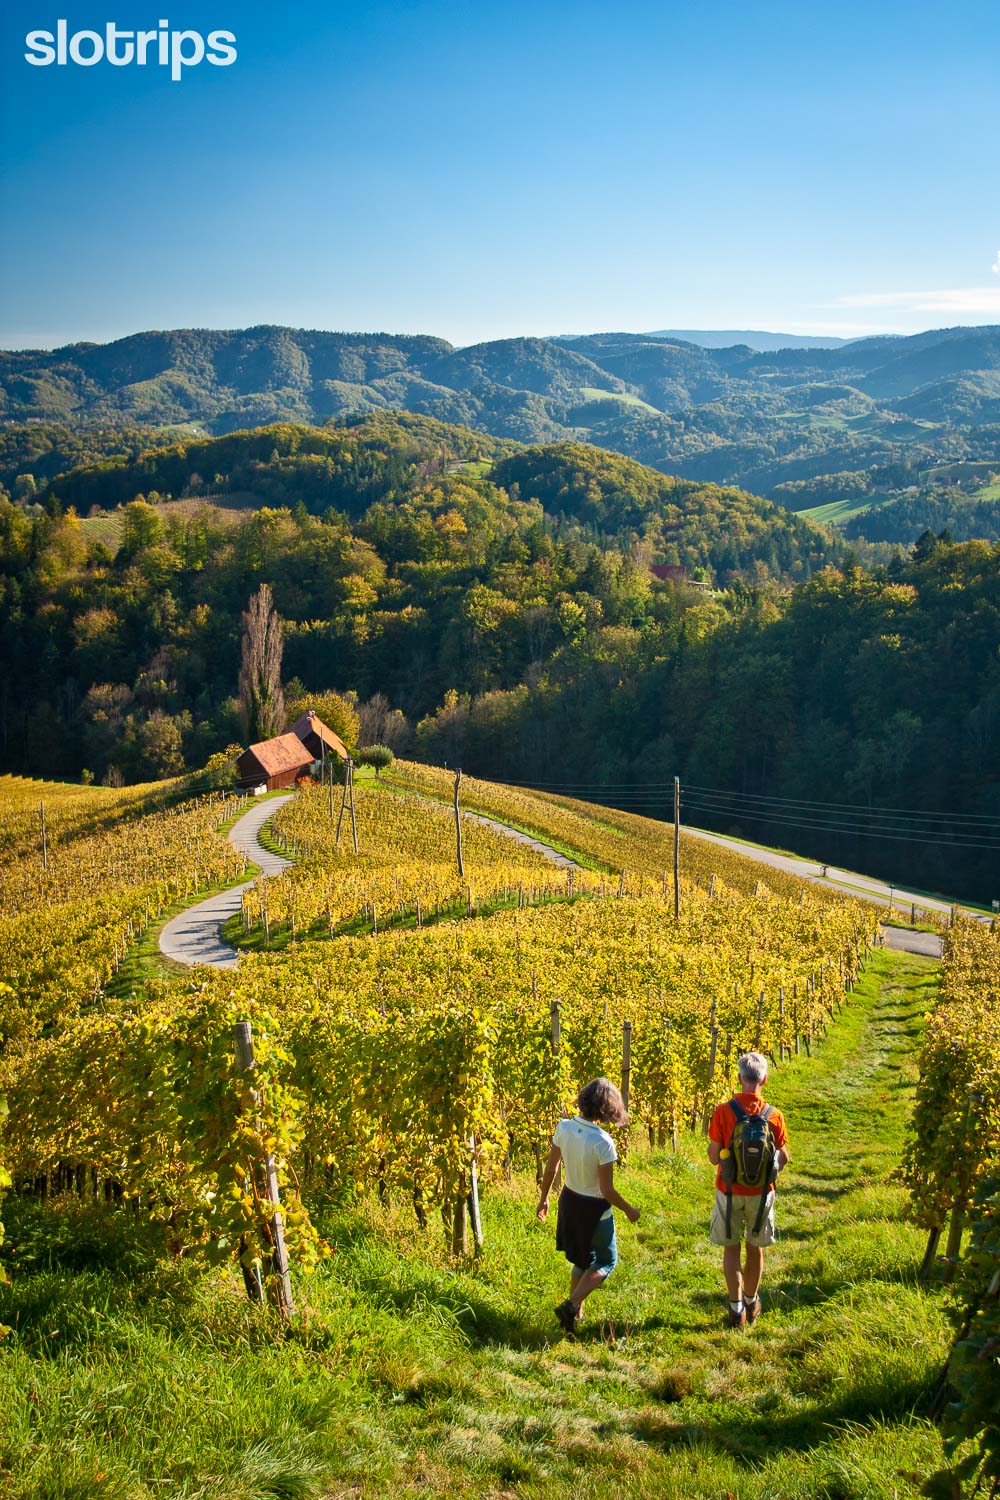 A couple in the vineyard above the heart road in the Styria region in Slovenia on the border with Austria